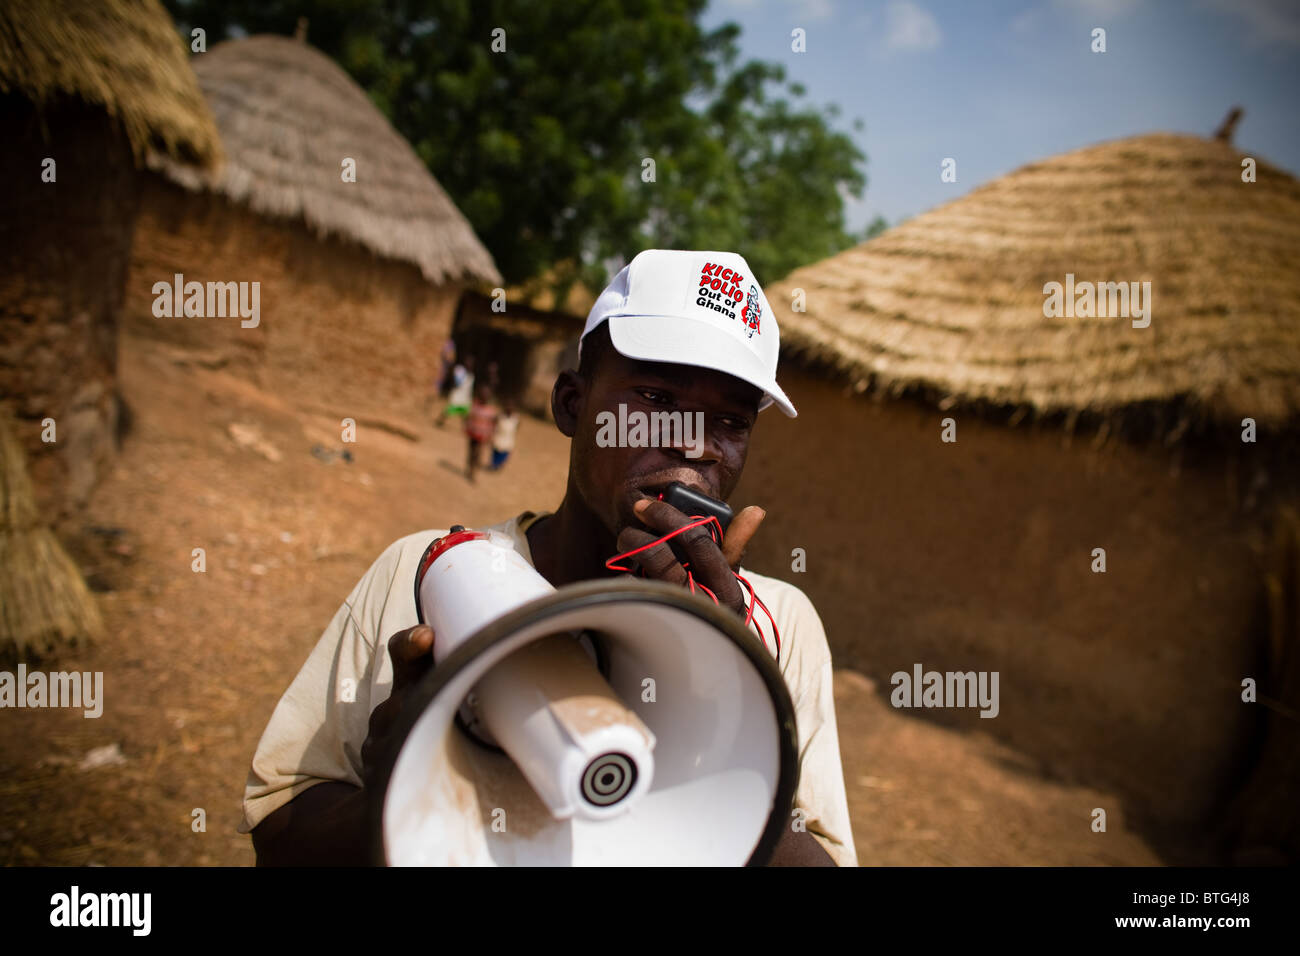 A community volunteer uses a megaphone to announce an upcoming national polio immunization campaign Stock Photo